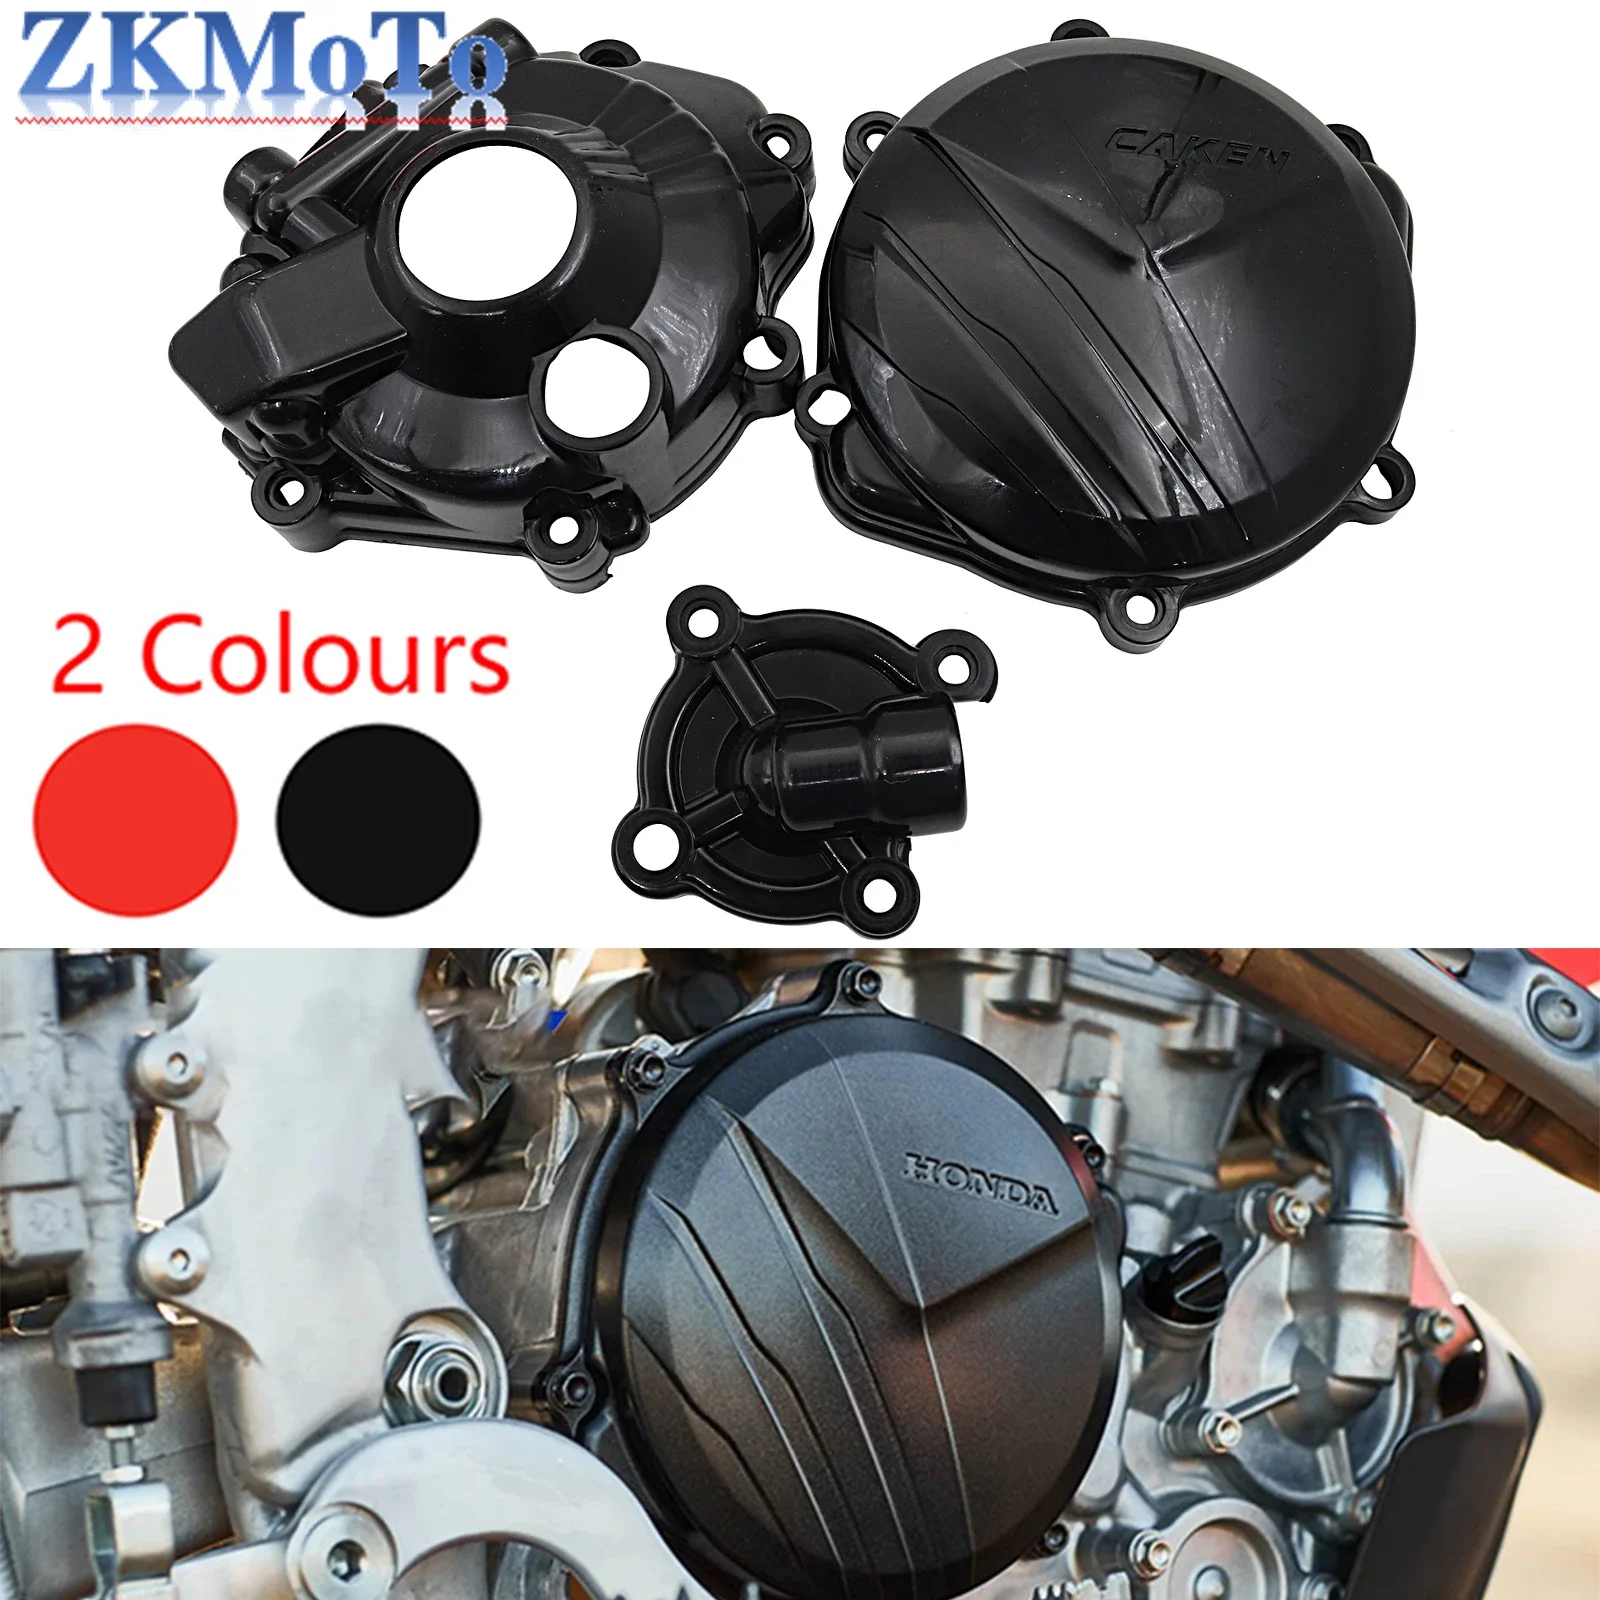 

CAKEN Motorcycle Ignition Guard Water Pump Cover Clutch Protector For Honda CRF 250R 250RX CRF250R CRF250RX 2018 2019 2020 2021